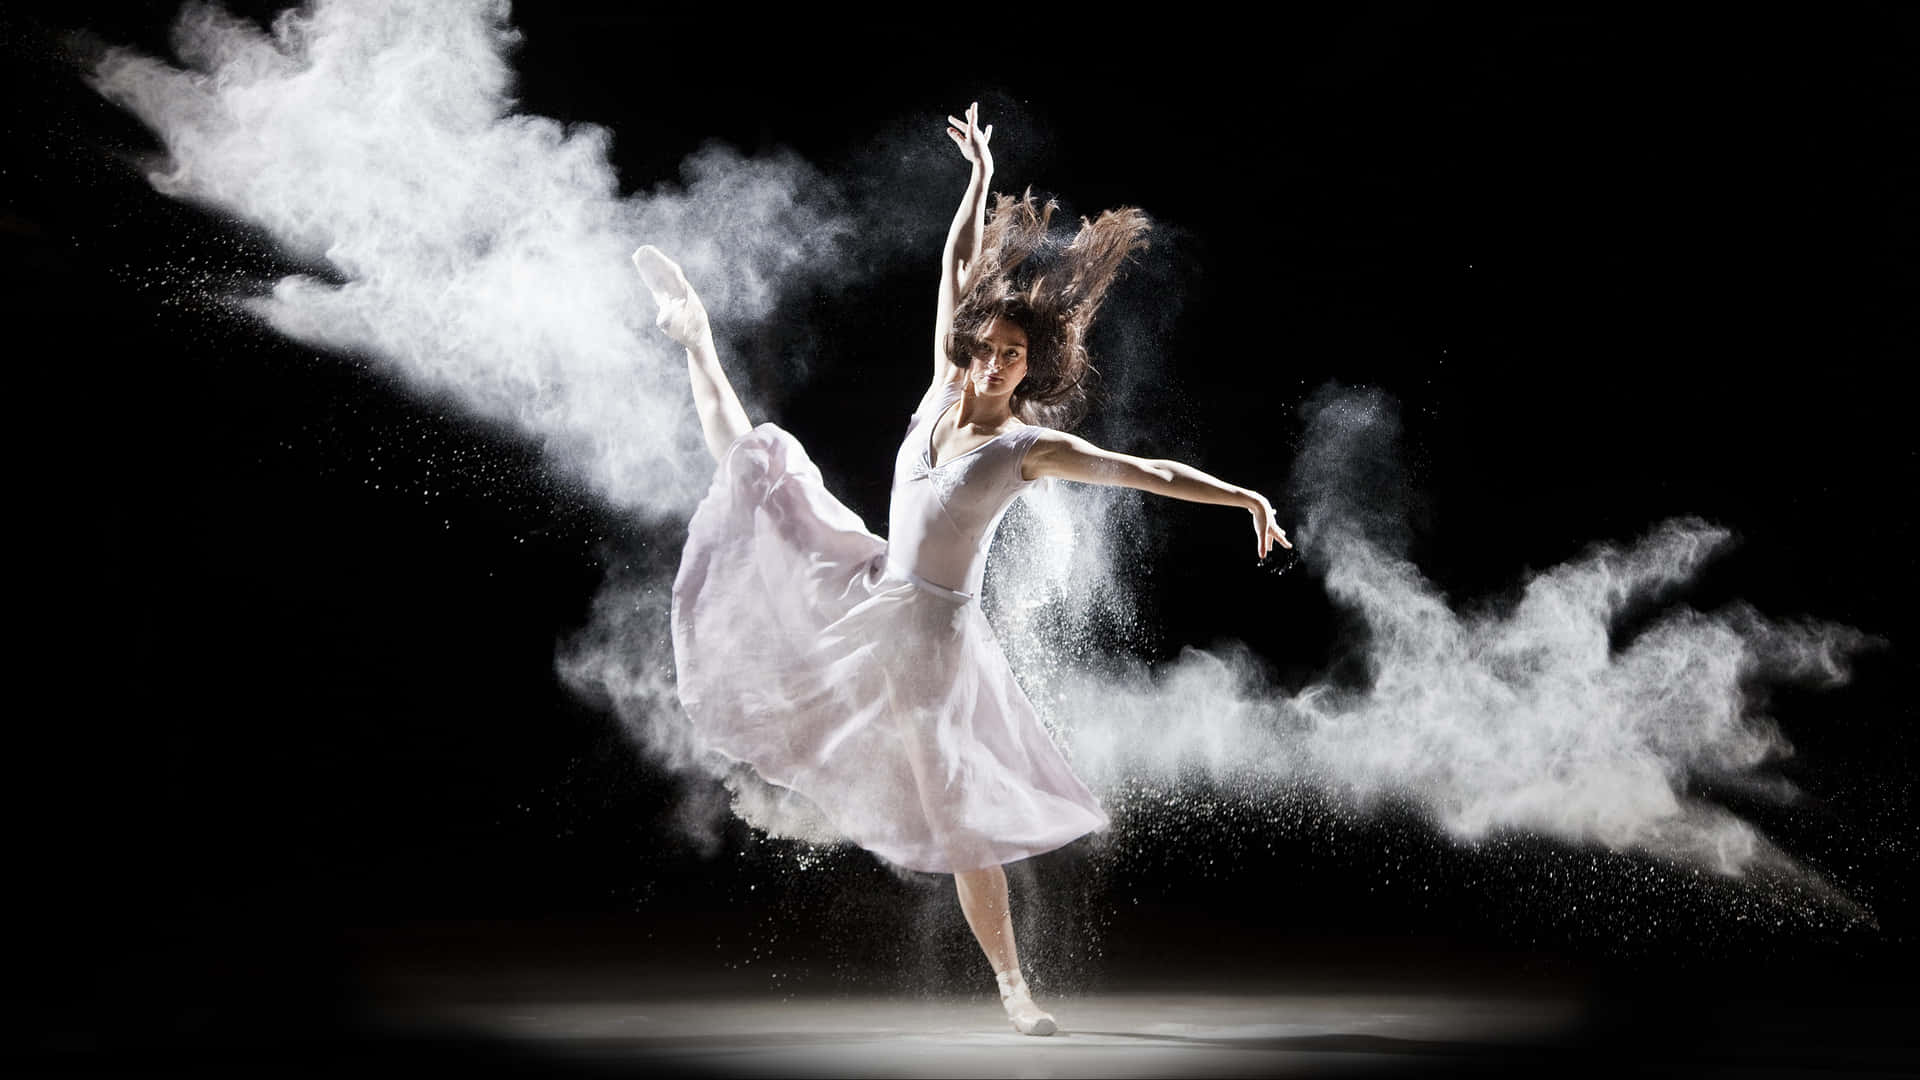 A Dancer Is Flying Through The Air With Powder